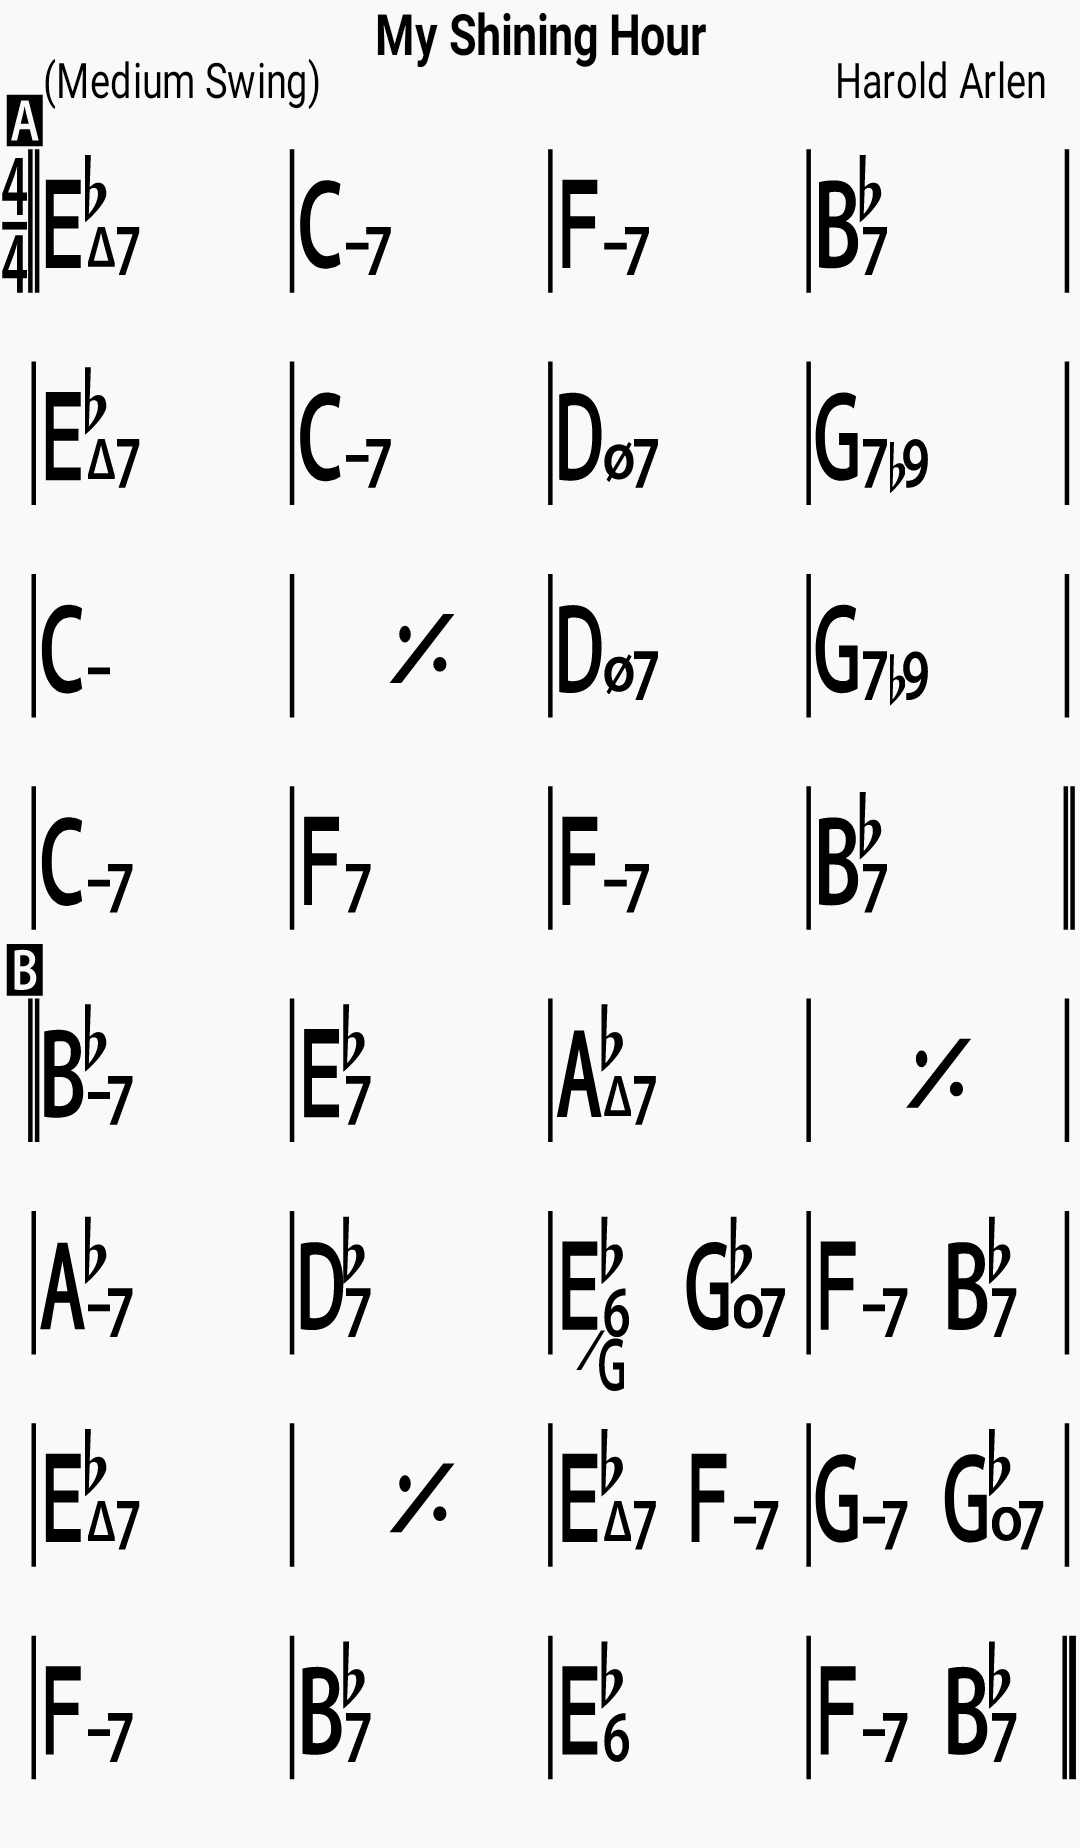 Chord chart for the jazz standard My Shining Hour